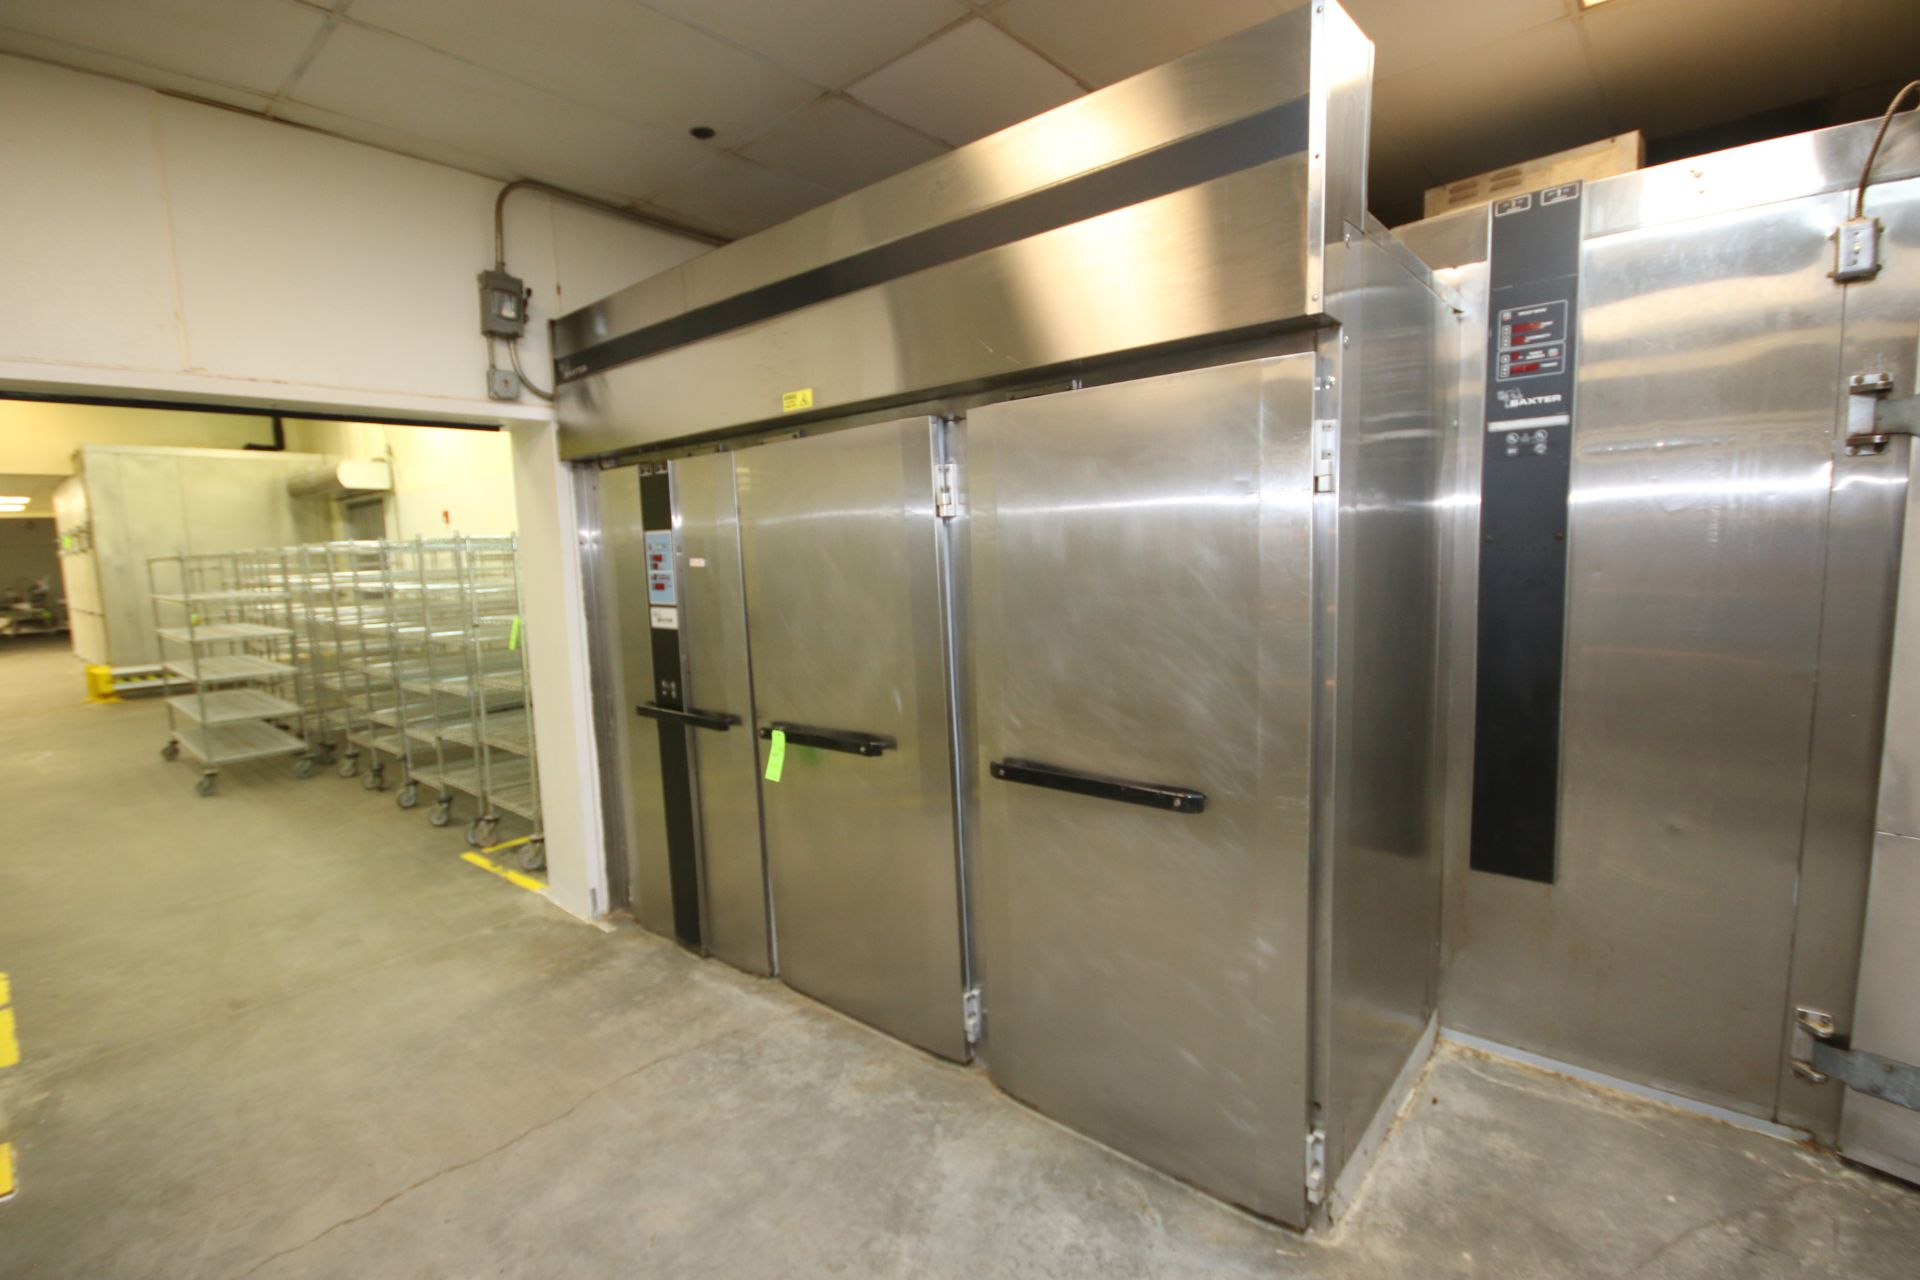 Baxter 3-Door S/S Proofer, Overall Dims.: Aprox. 120" L x 45" W x 99-1/2" H (LOCATED AT BAKE SHOP--